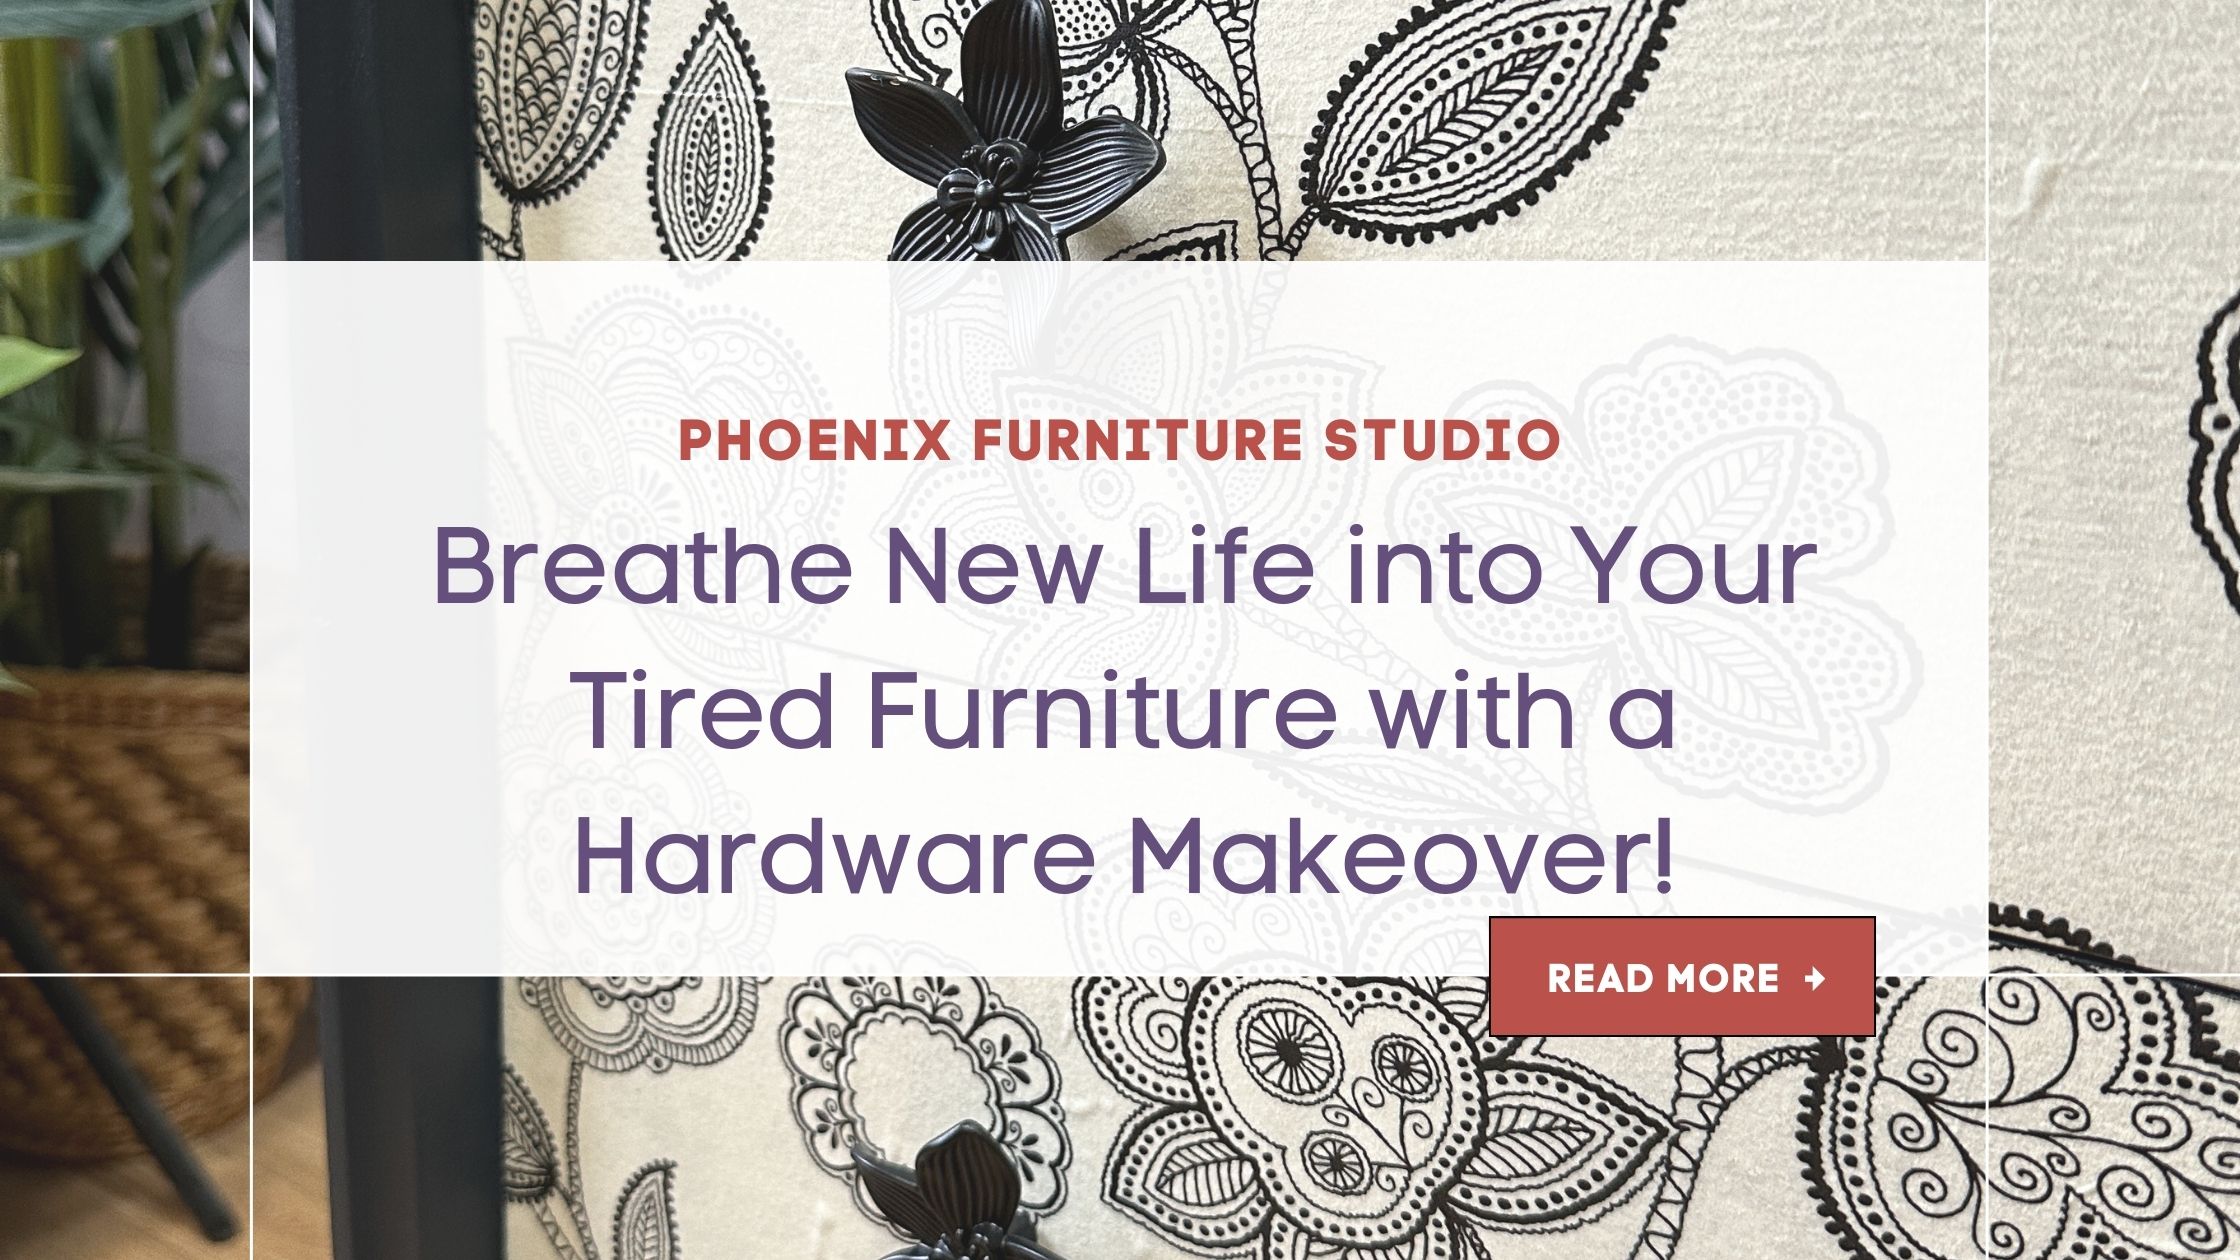 Breathe New Life into Your Tired Furniture with a Hardware Makeover!